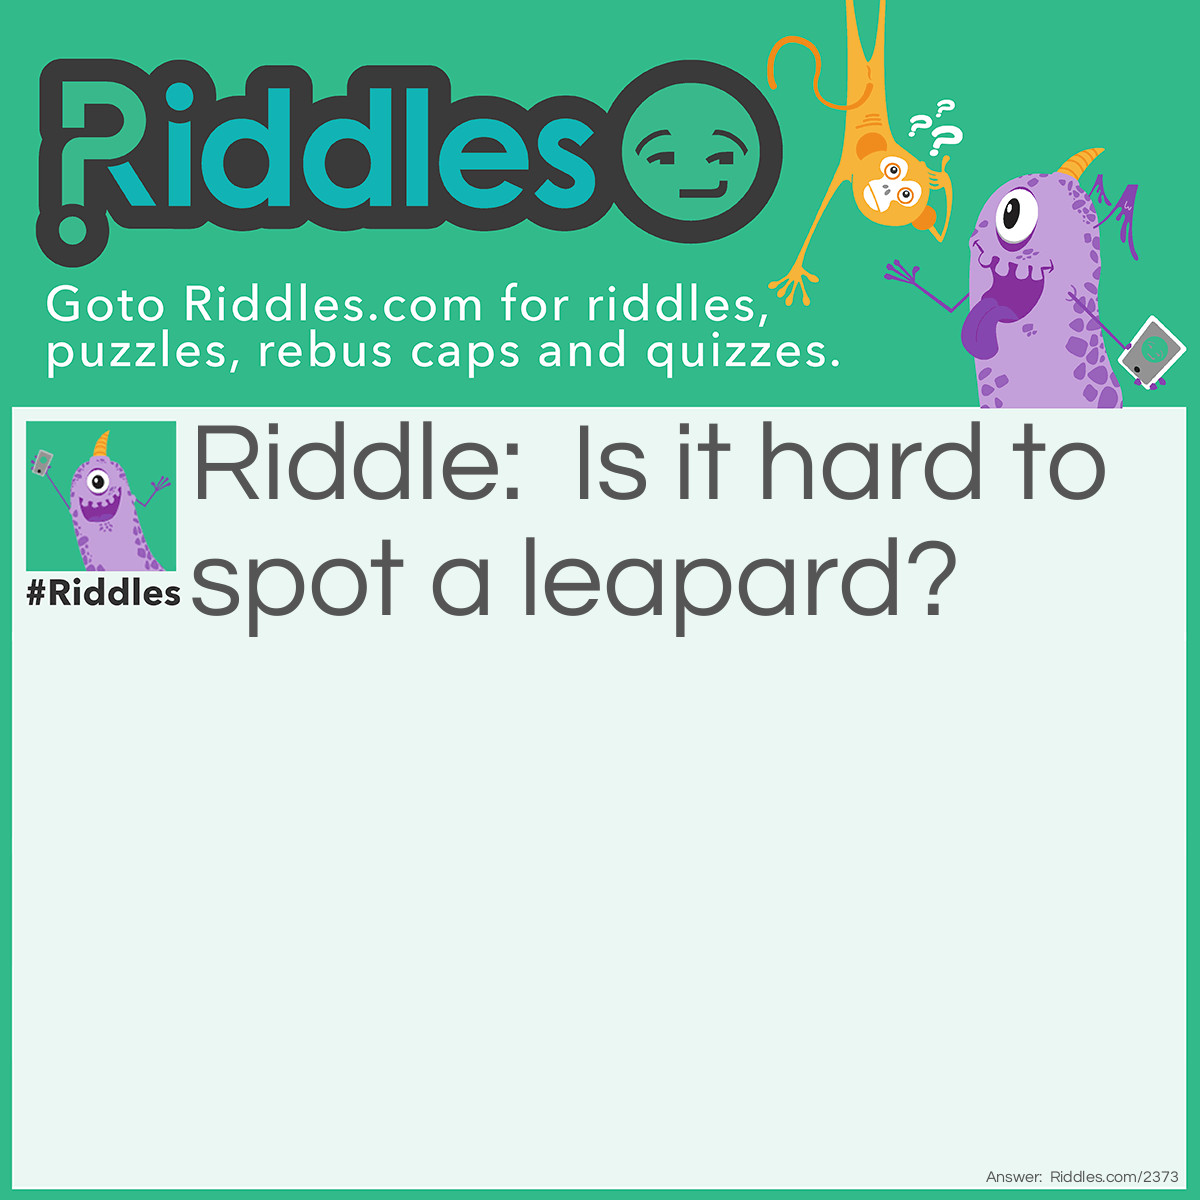 Riddle: Is it hard to spot a leapard? Answer: No, they come that way.